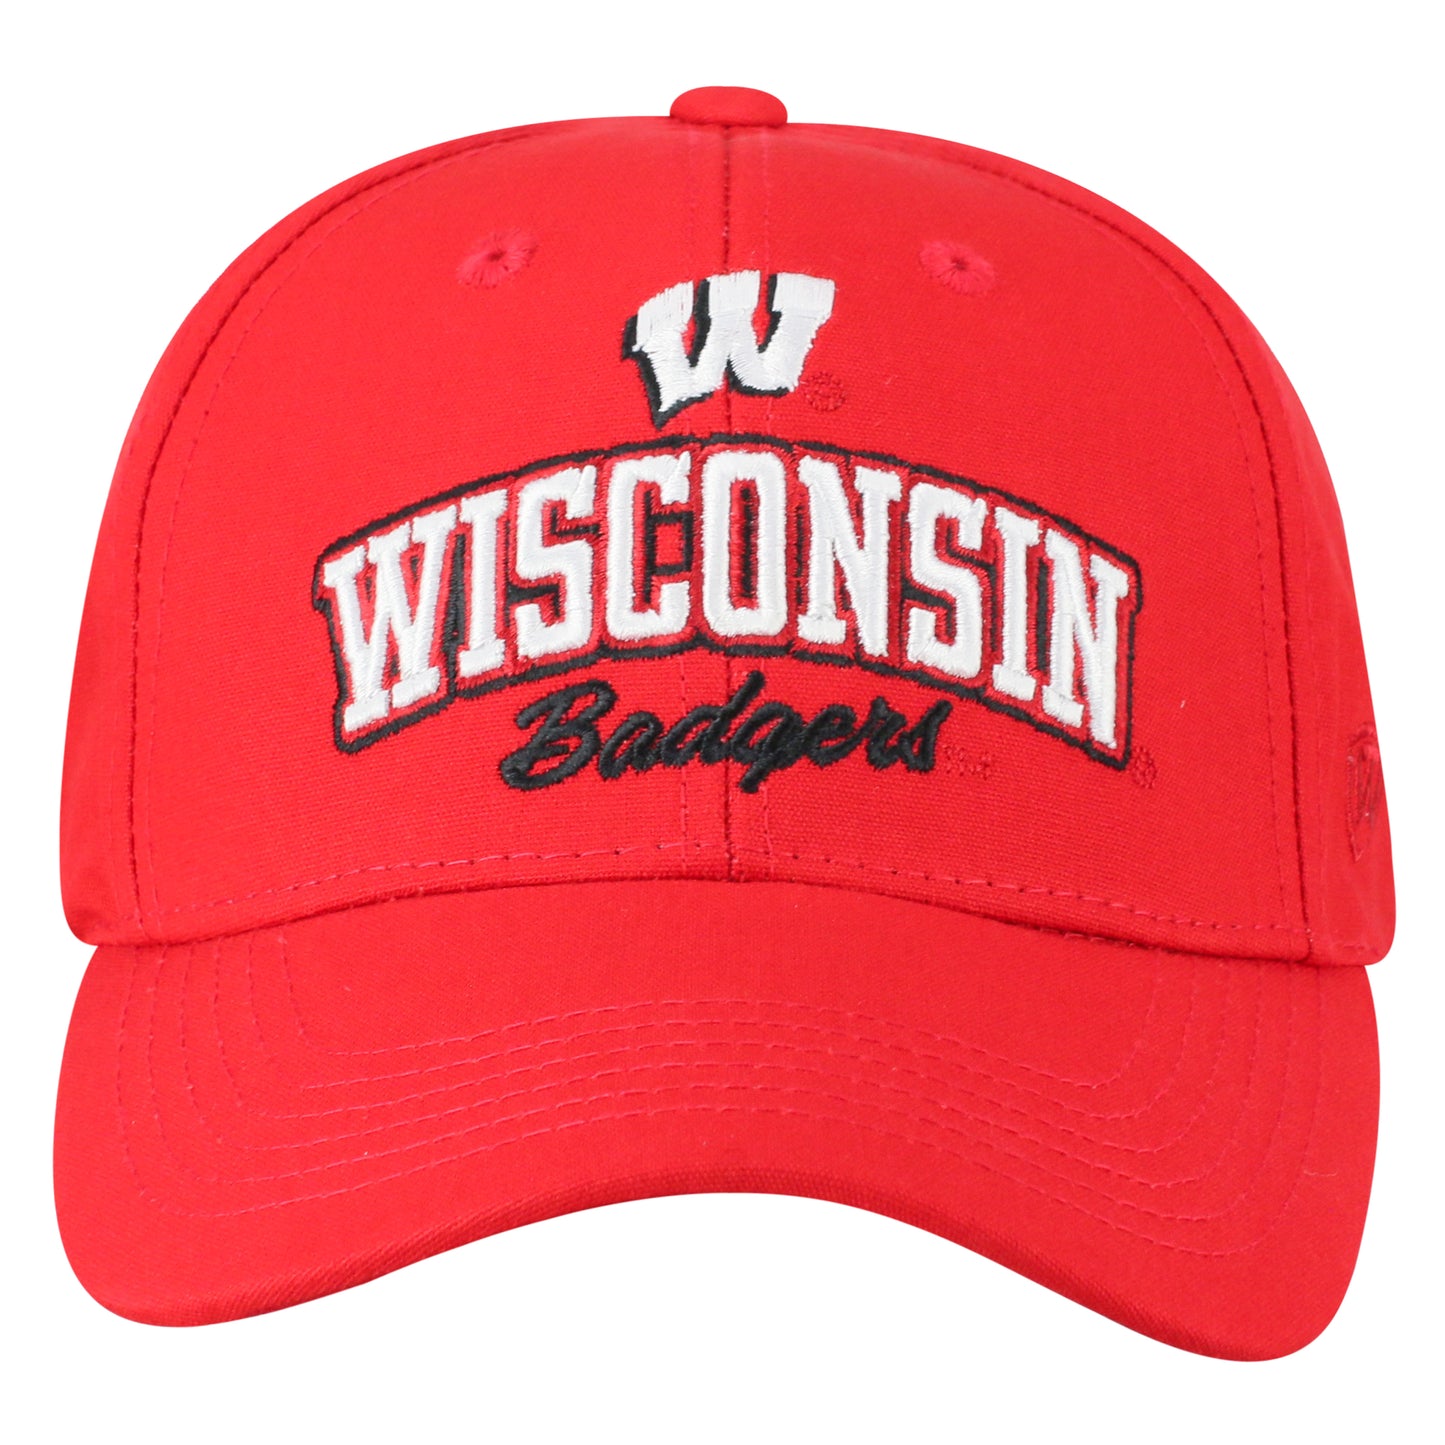 Mens Wisconsin Badgers Advisor Adjustable Hat By Top Of The World